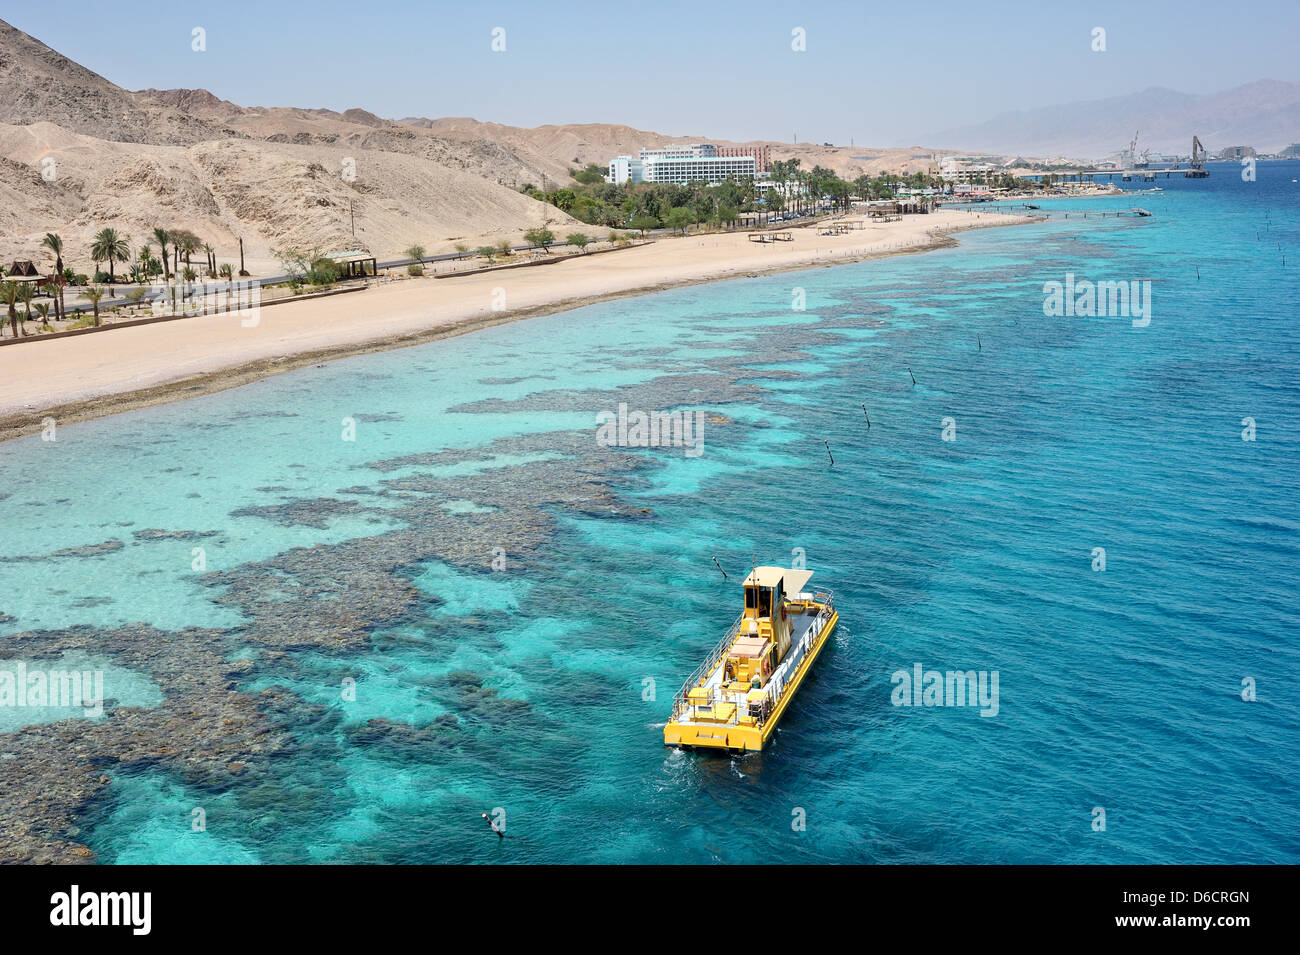 Red sea coast and coral reef Stock Photo